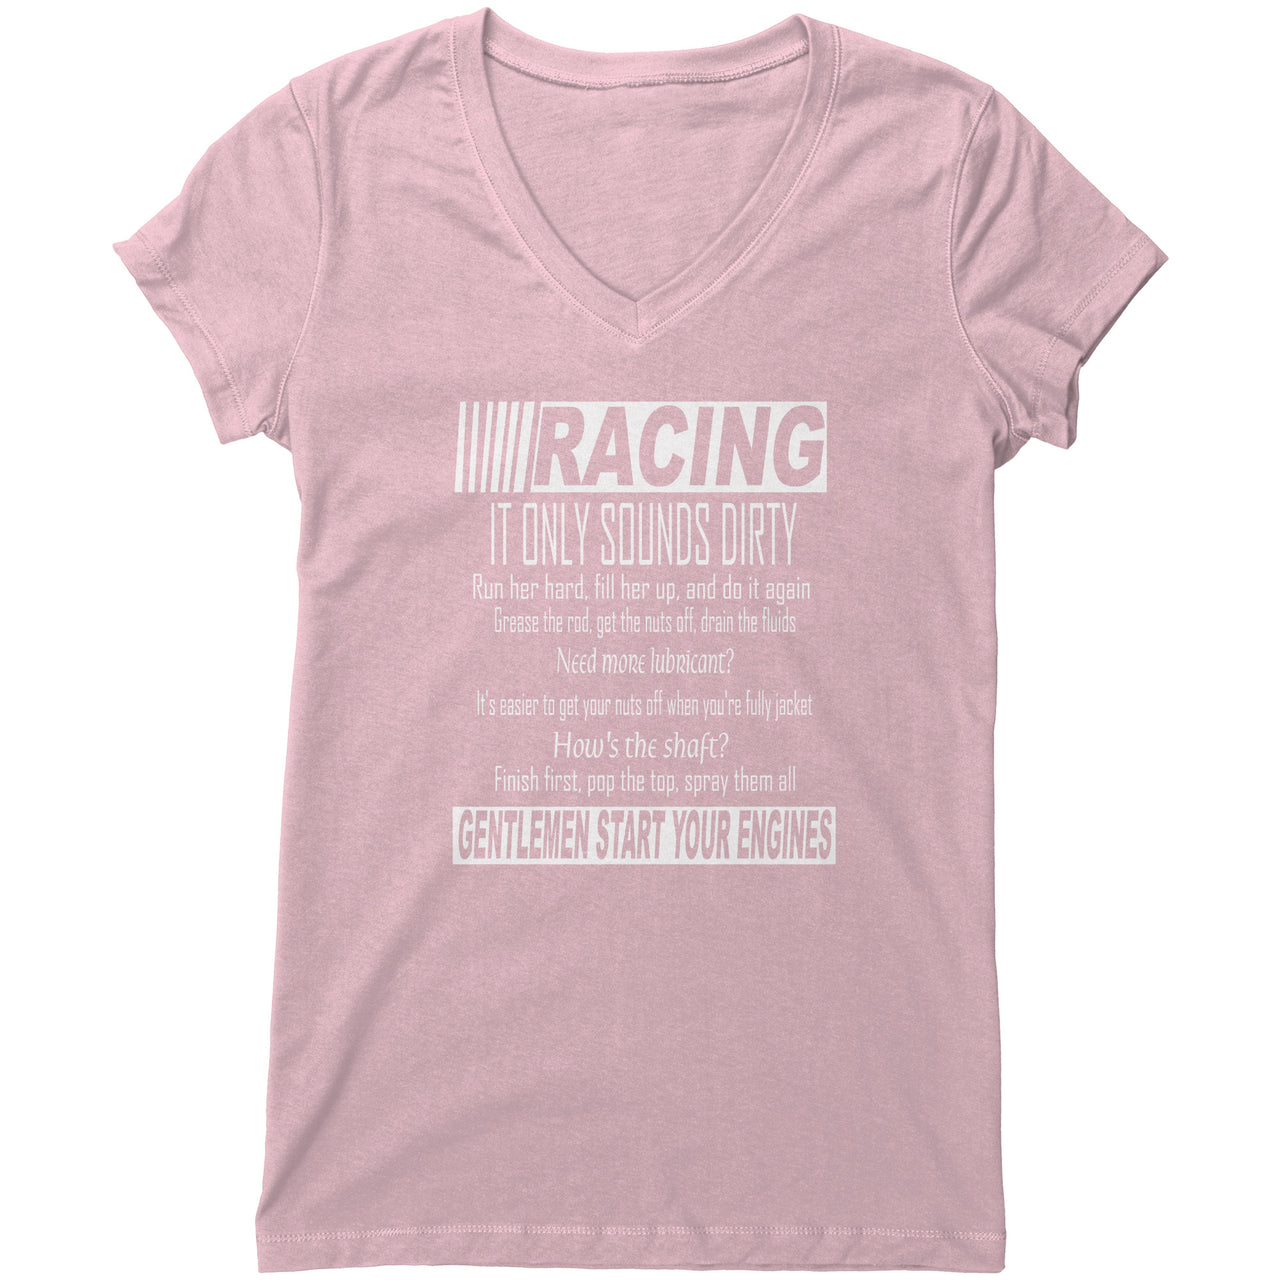 Racing It only sounds dirty Women's T-Shirts